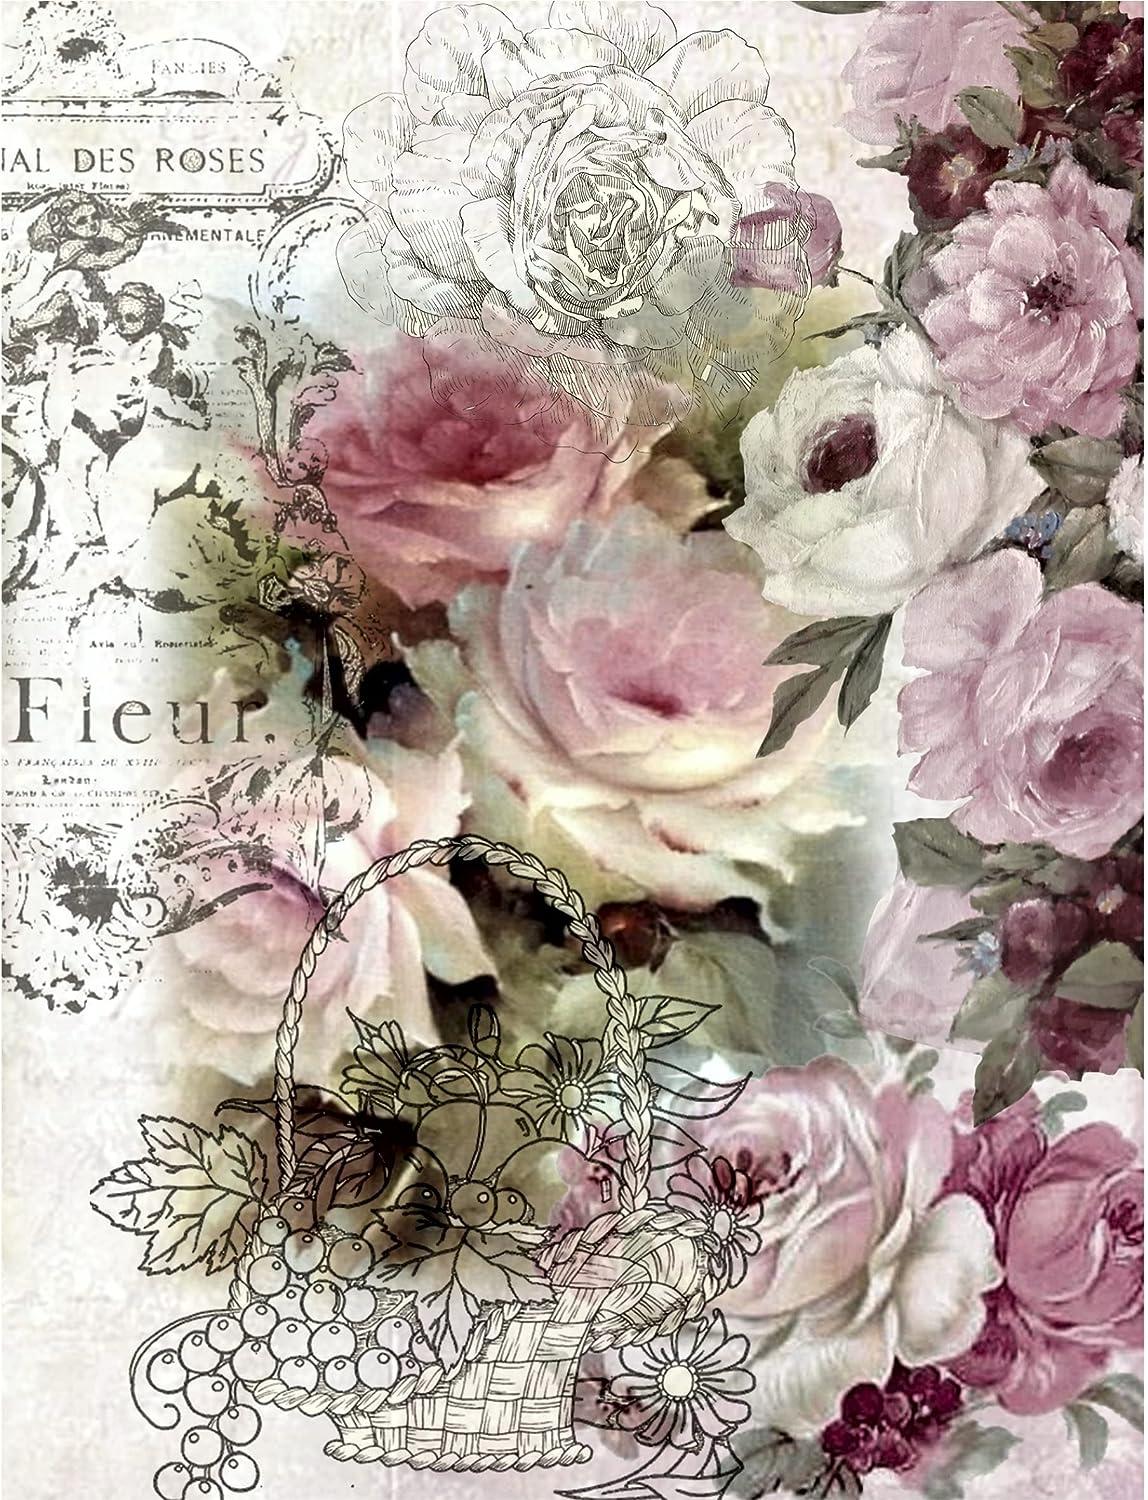 Distressed Floral Overlay Rice Paper, 8 x 10.5 inch - 6 x Different Printed Mulberry Paper Images 30gsm Visible Fibres for Decoupage Crafts Mixed